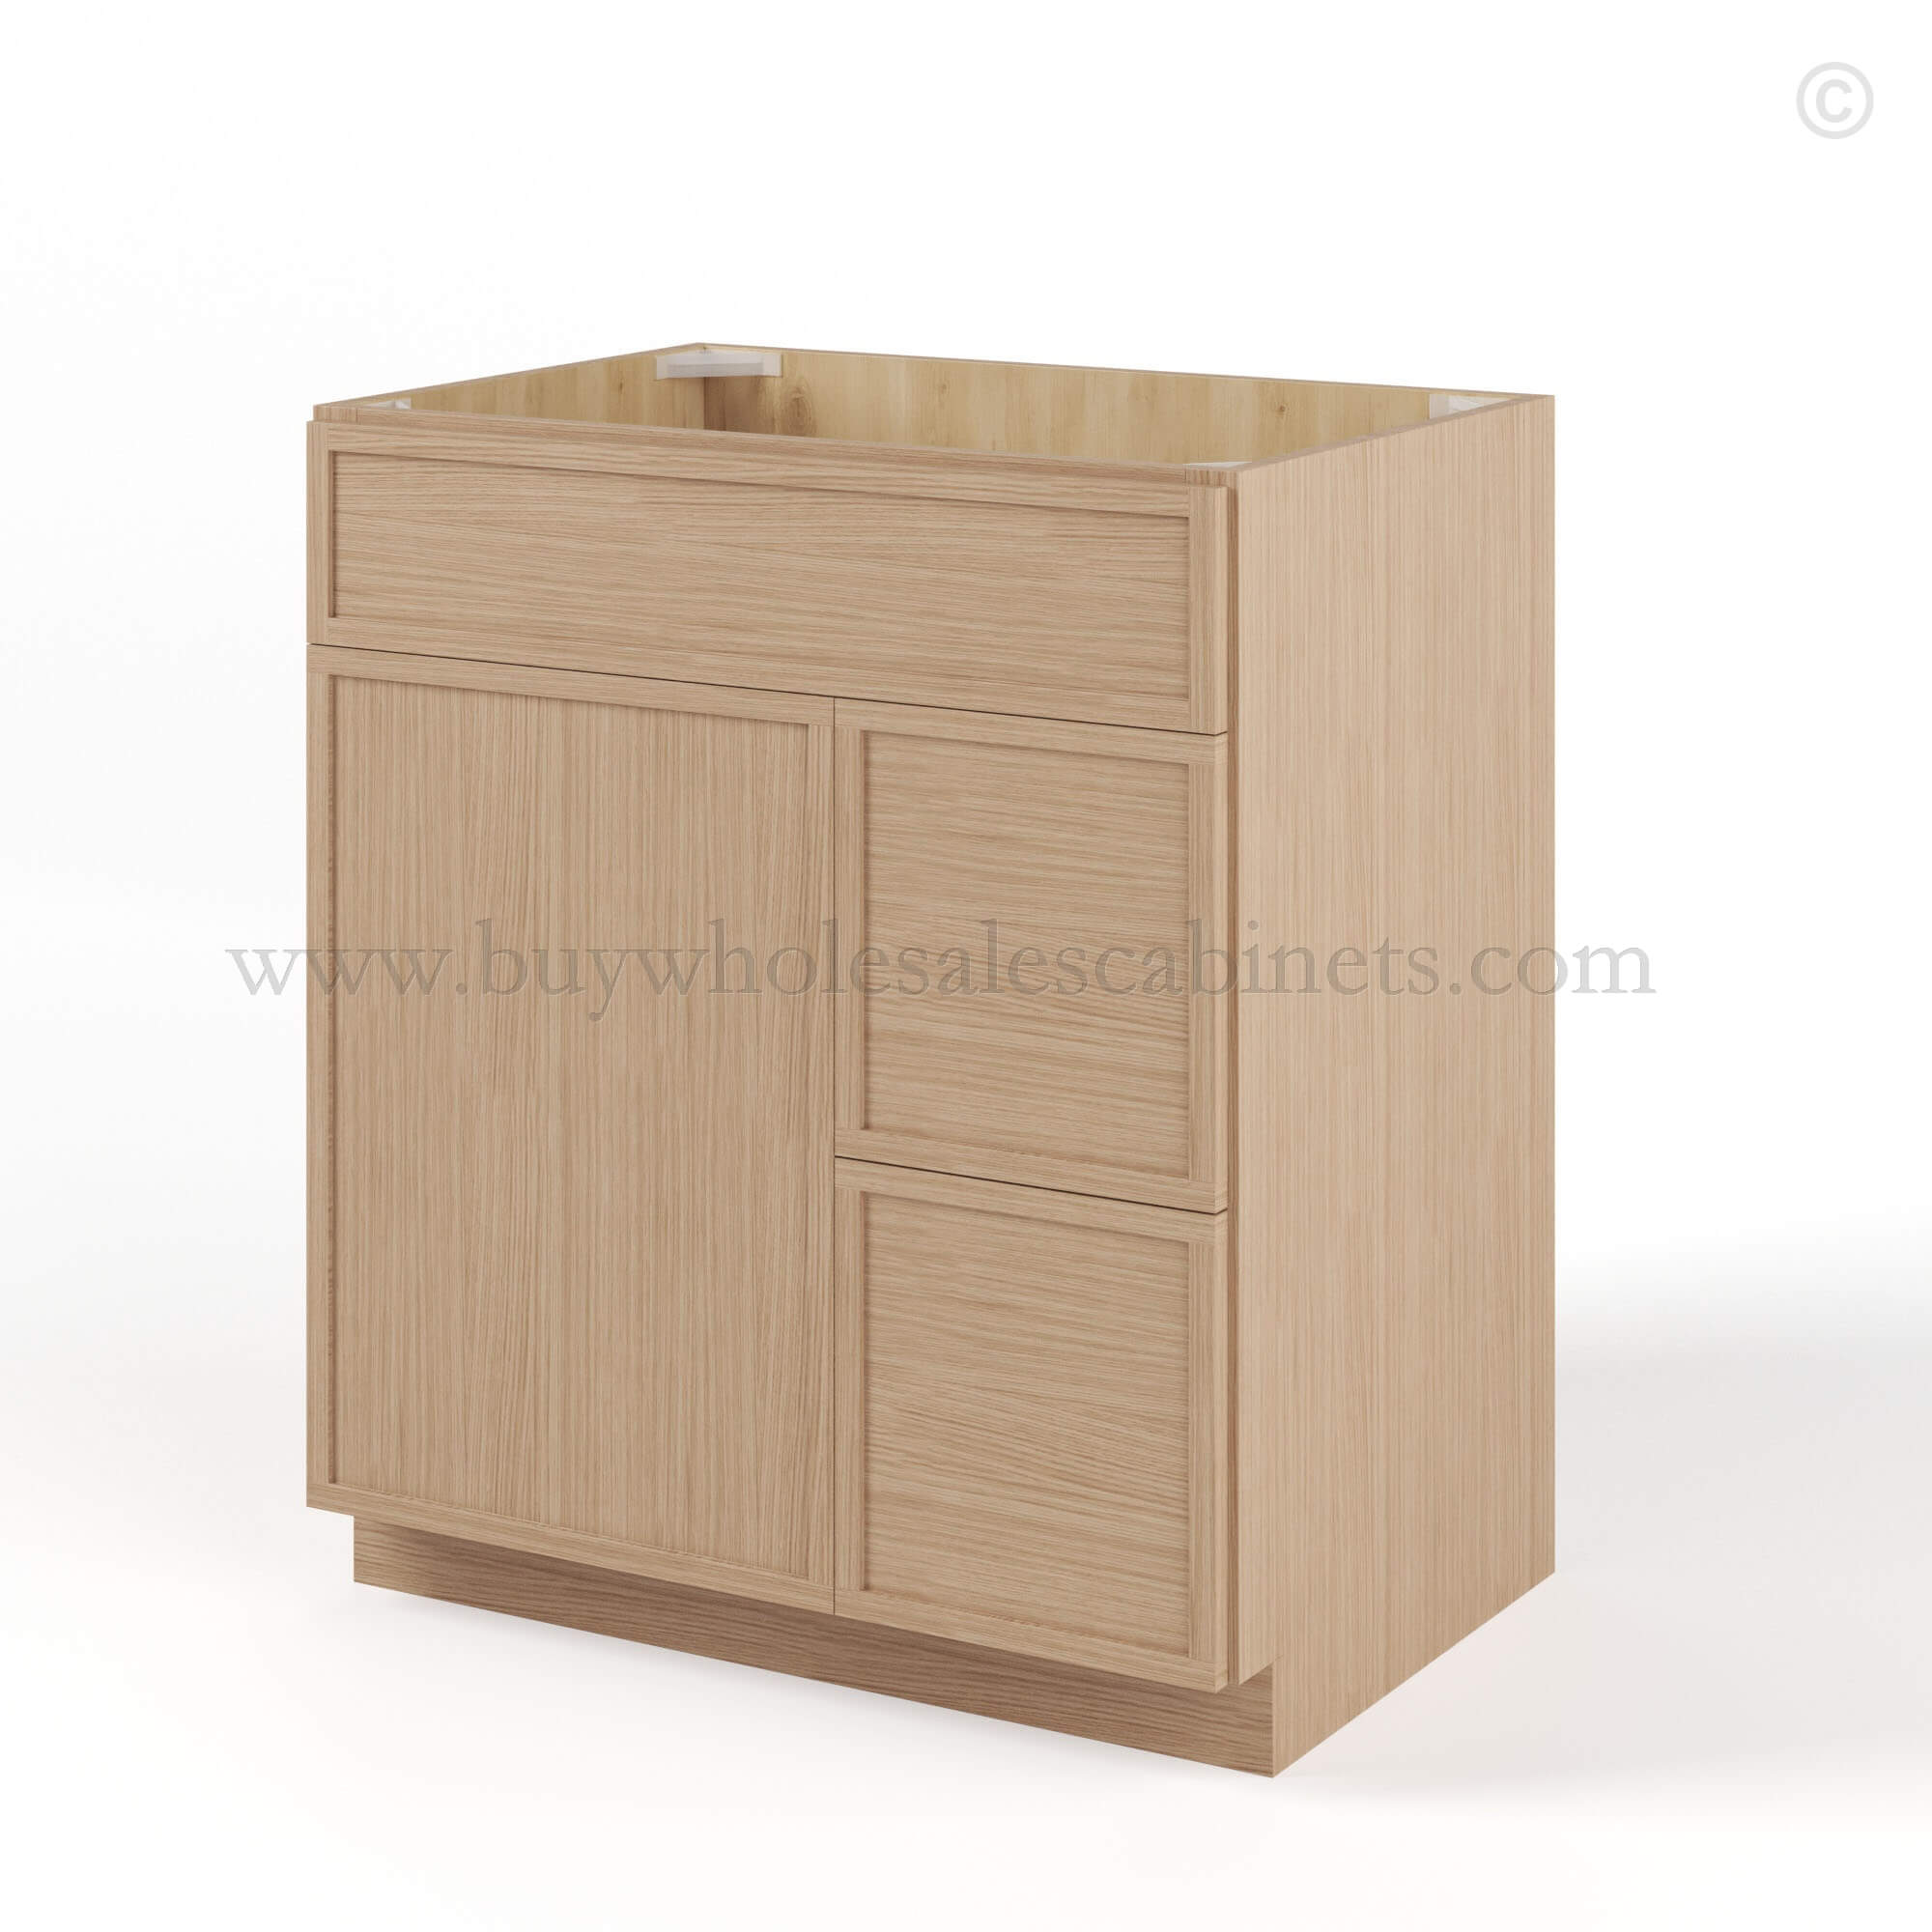 Slim Oak Shaker Vanity Combo with Drawers, rta cabinets, wholesale cabinets